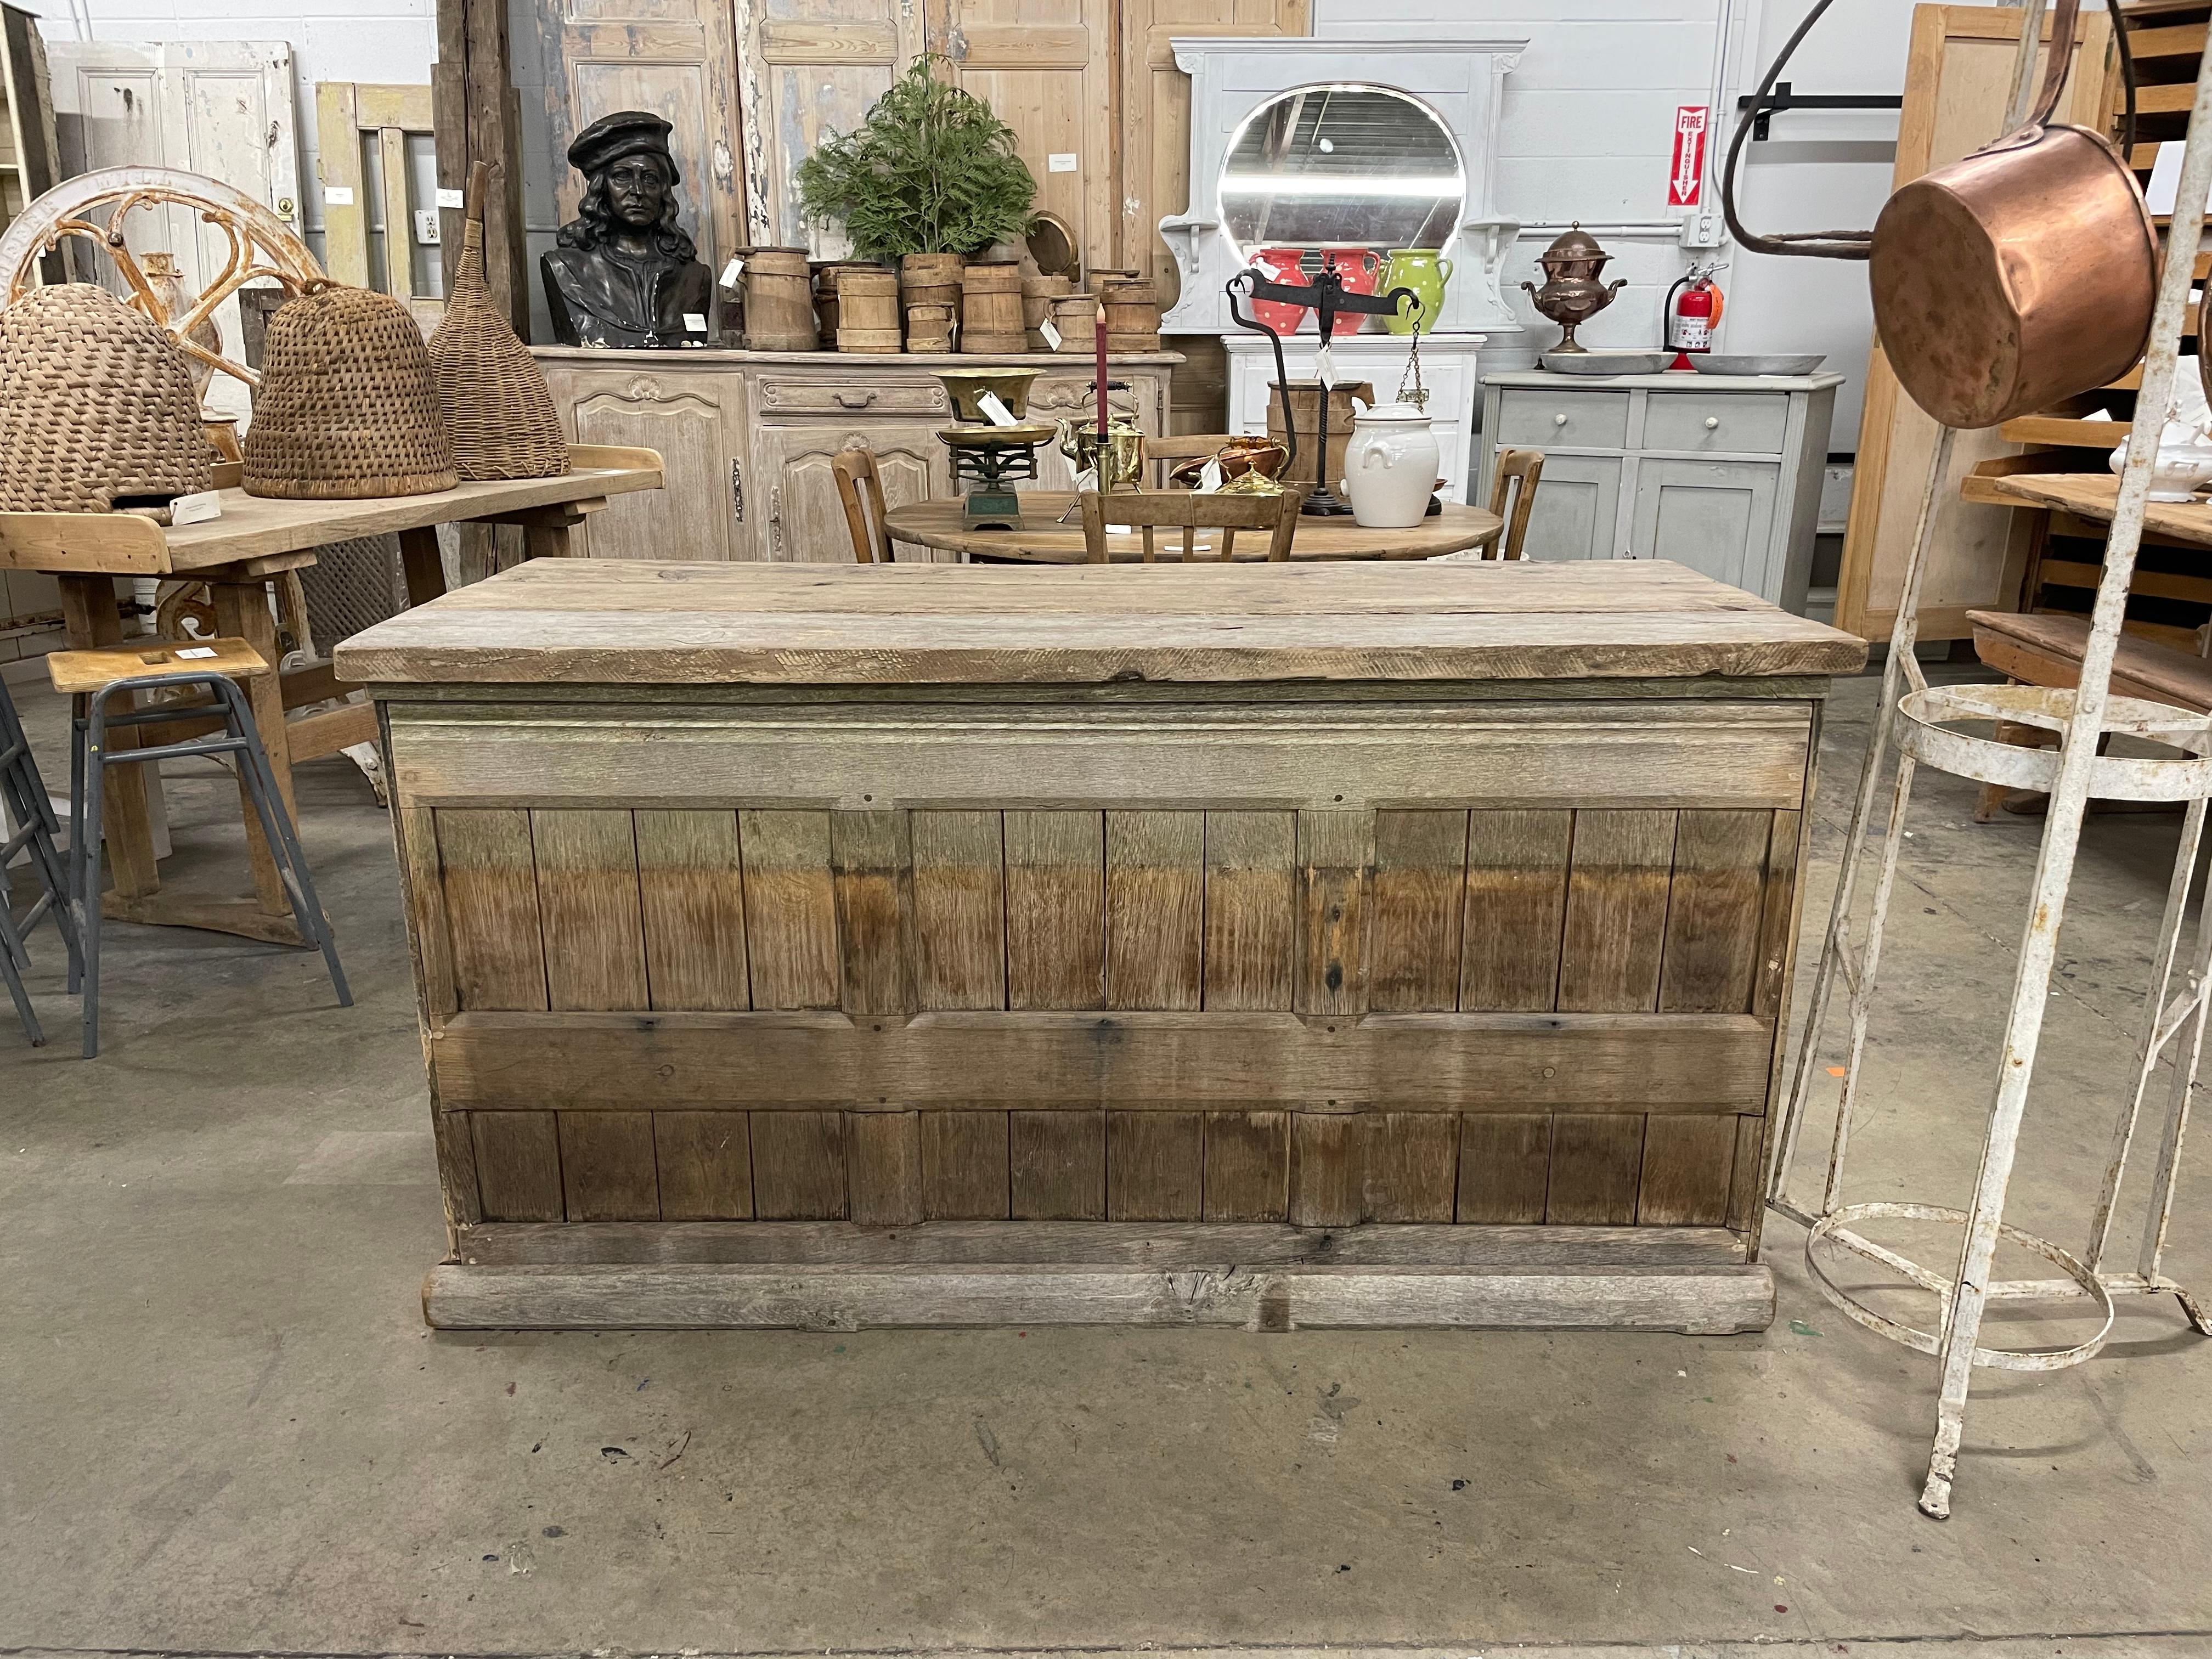 Antique unadorned Welsh rustic oak shop counter with pine top. It has 2 shelves to the back.

Wonderful in a cottage kitchen.